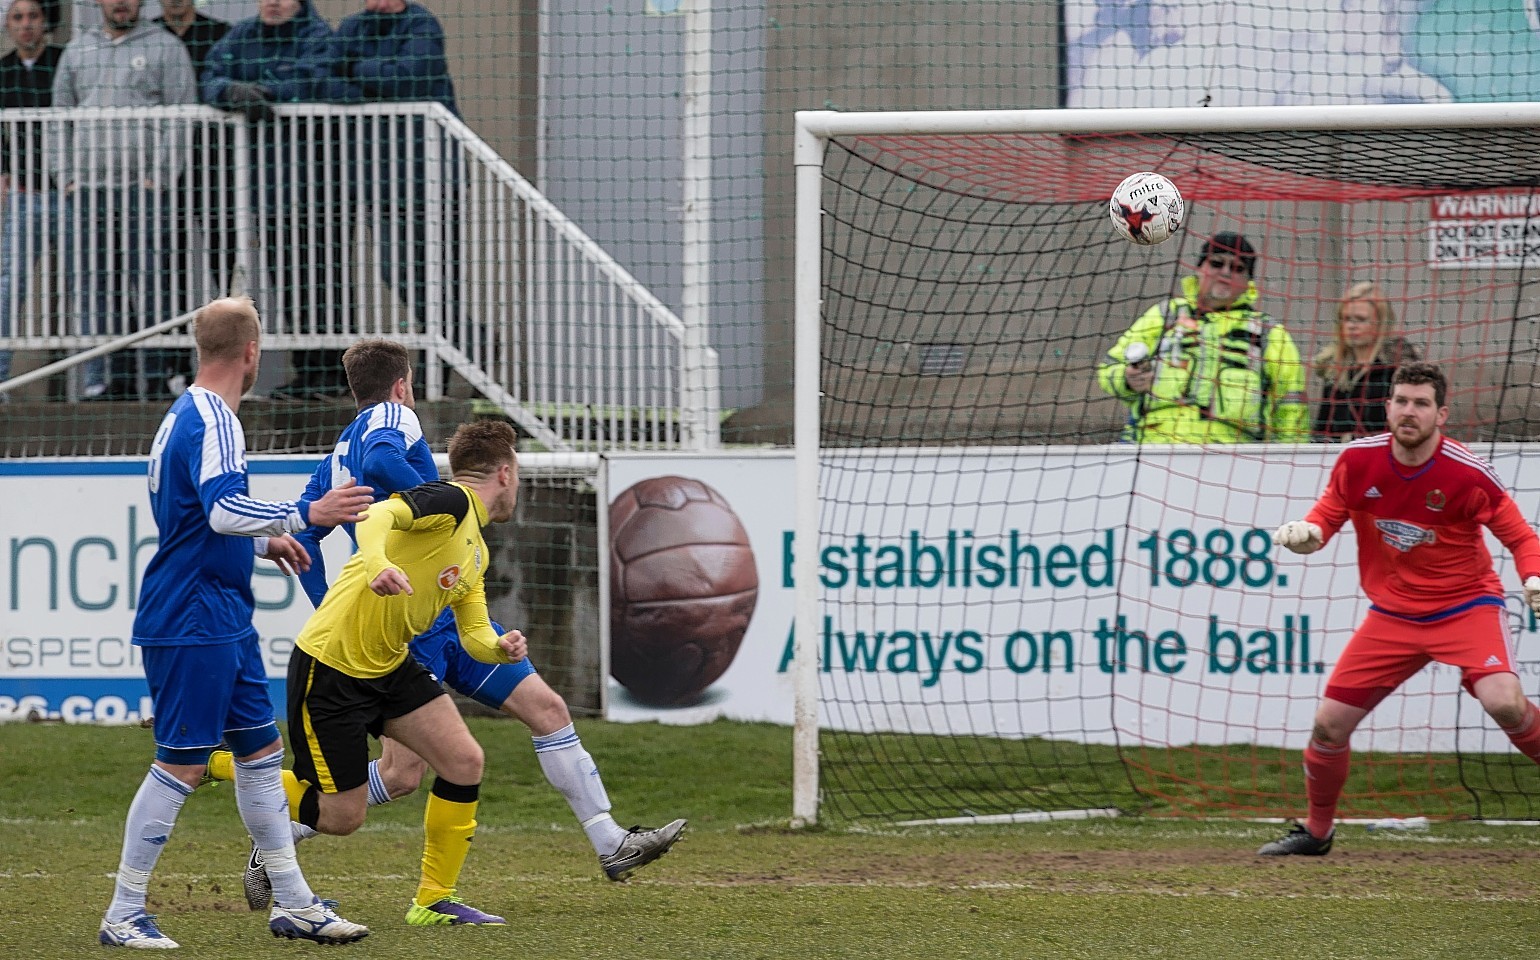 Ross Allum heads home his first goal of the game